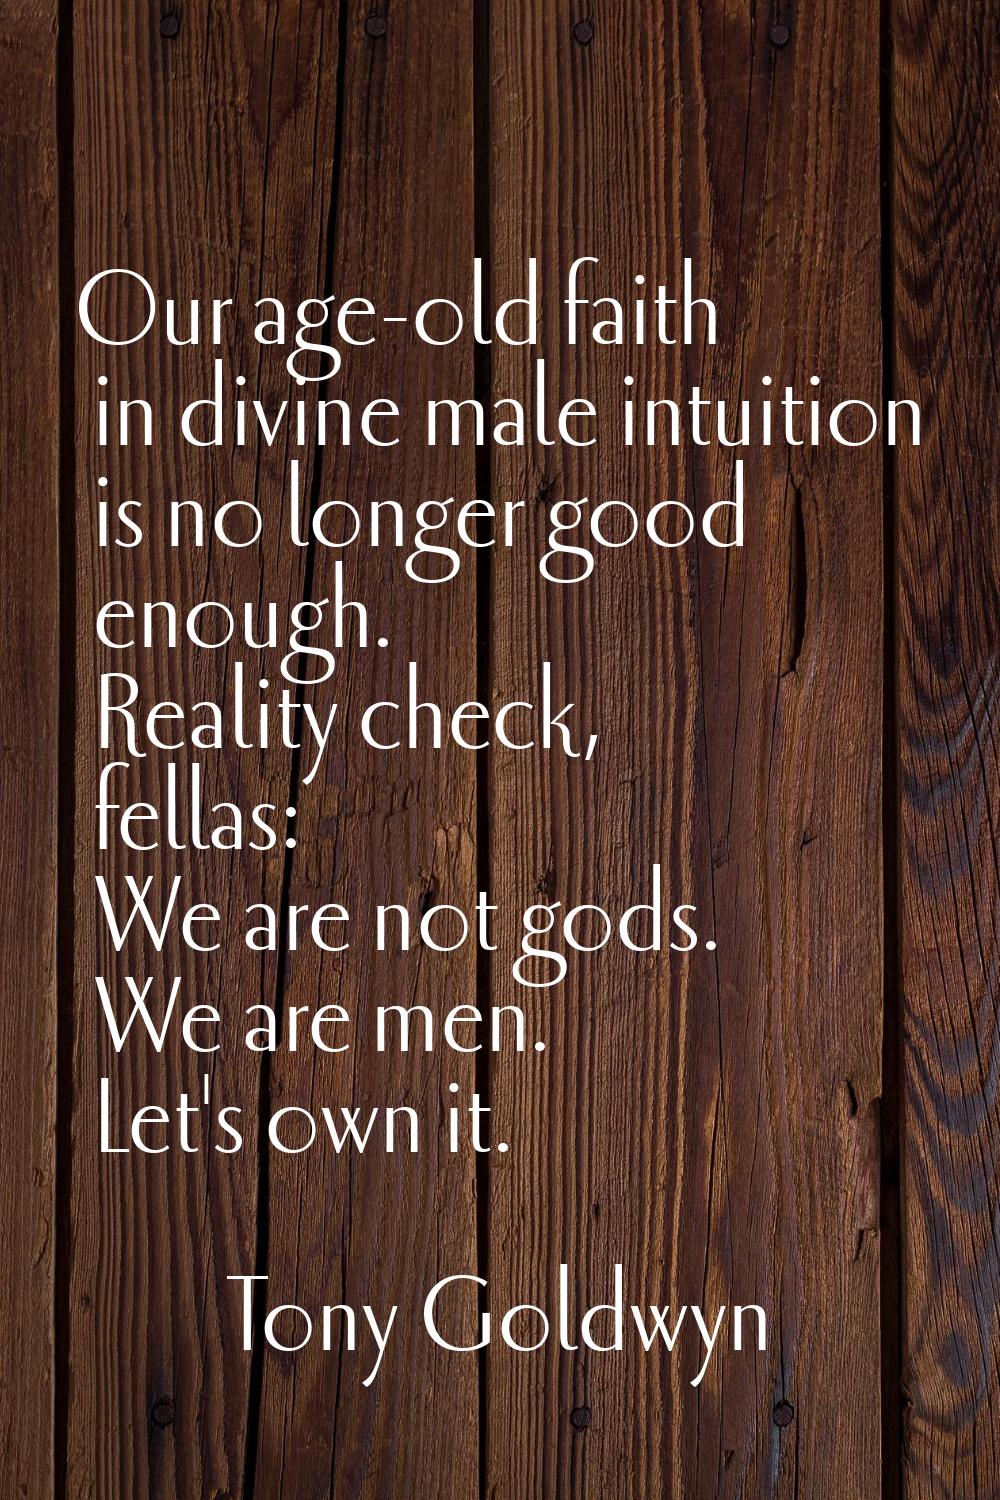 Our age-old faith in divine male intuition is no longer good enough. Reality check, fellas: We are 